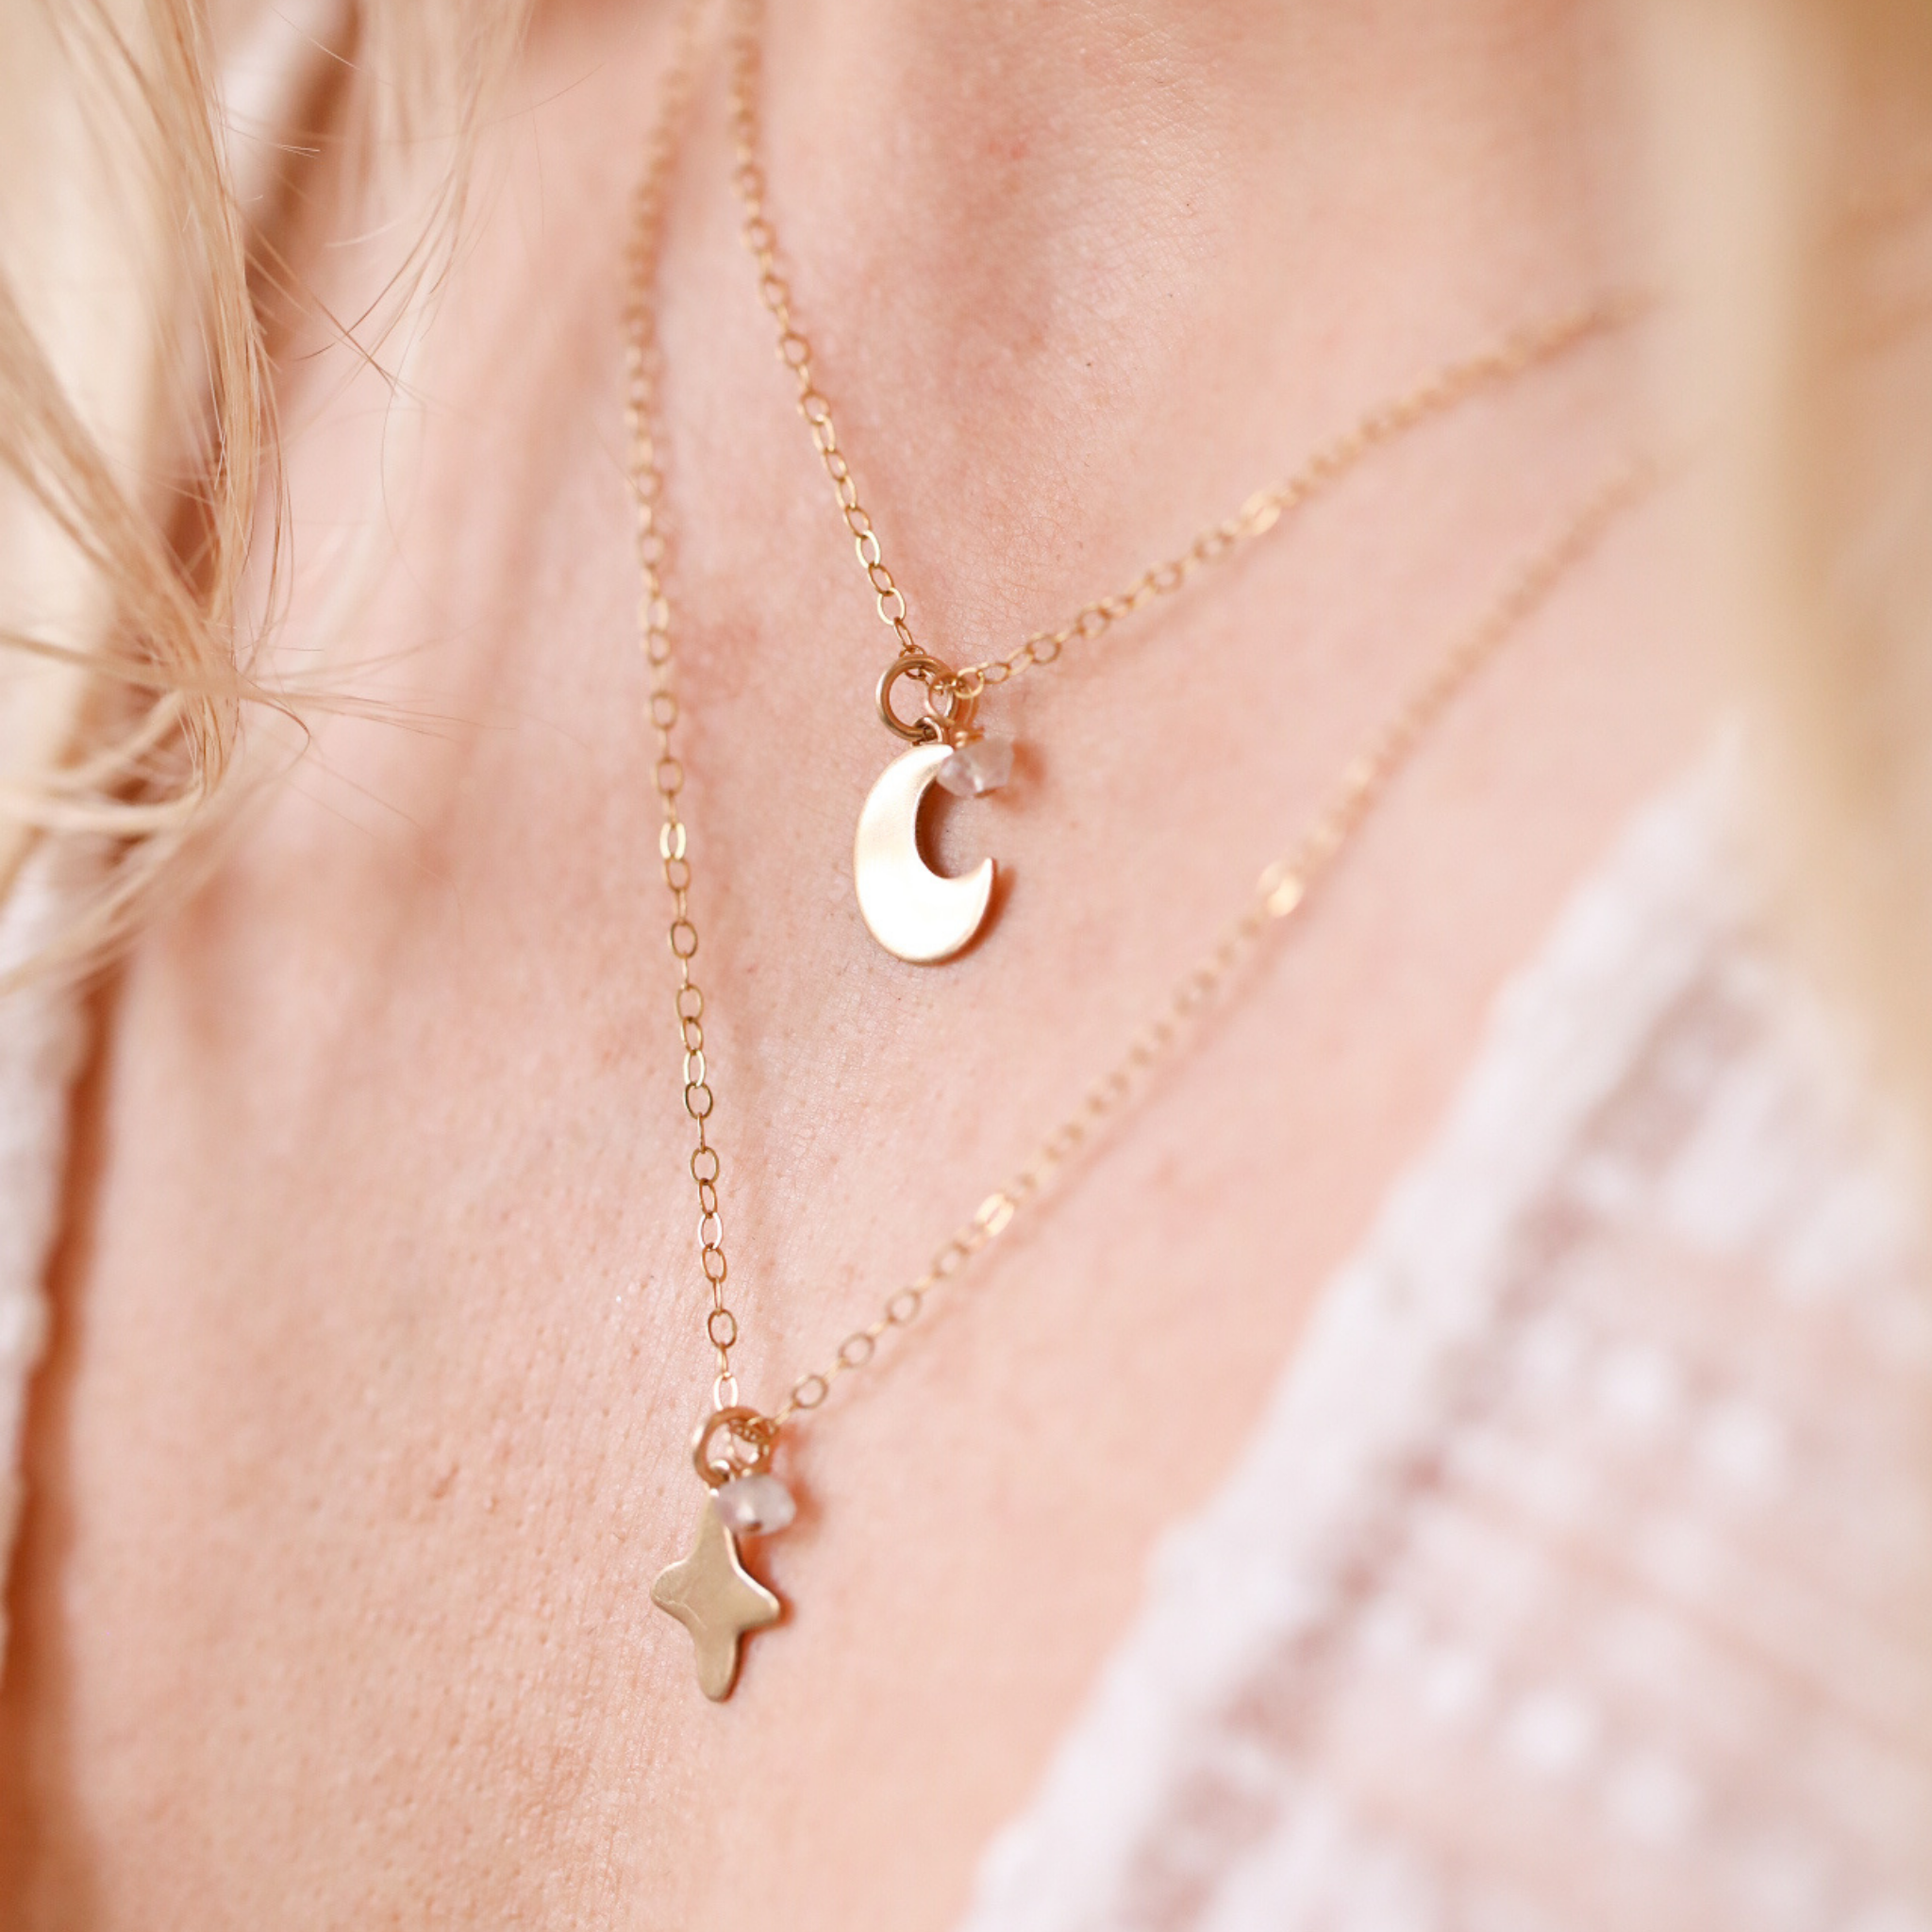 Healing Jewelry: The Journey Behind the Unity Collection for Sentimental Gifts